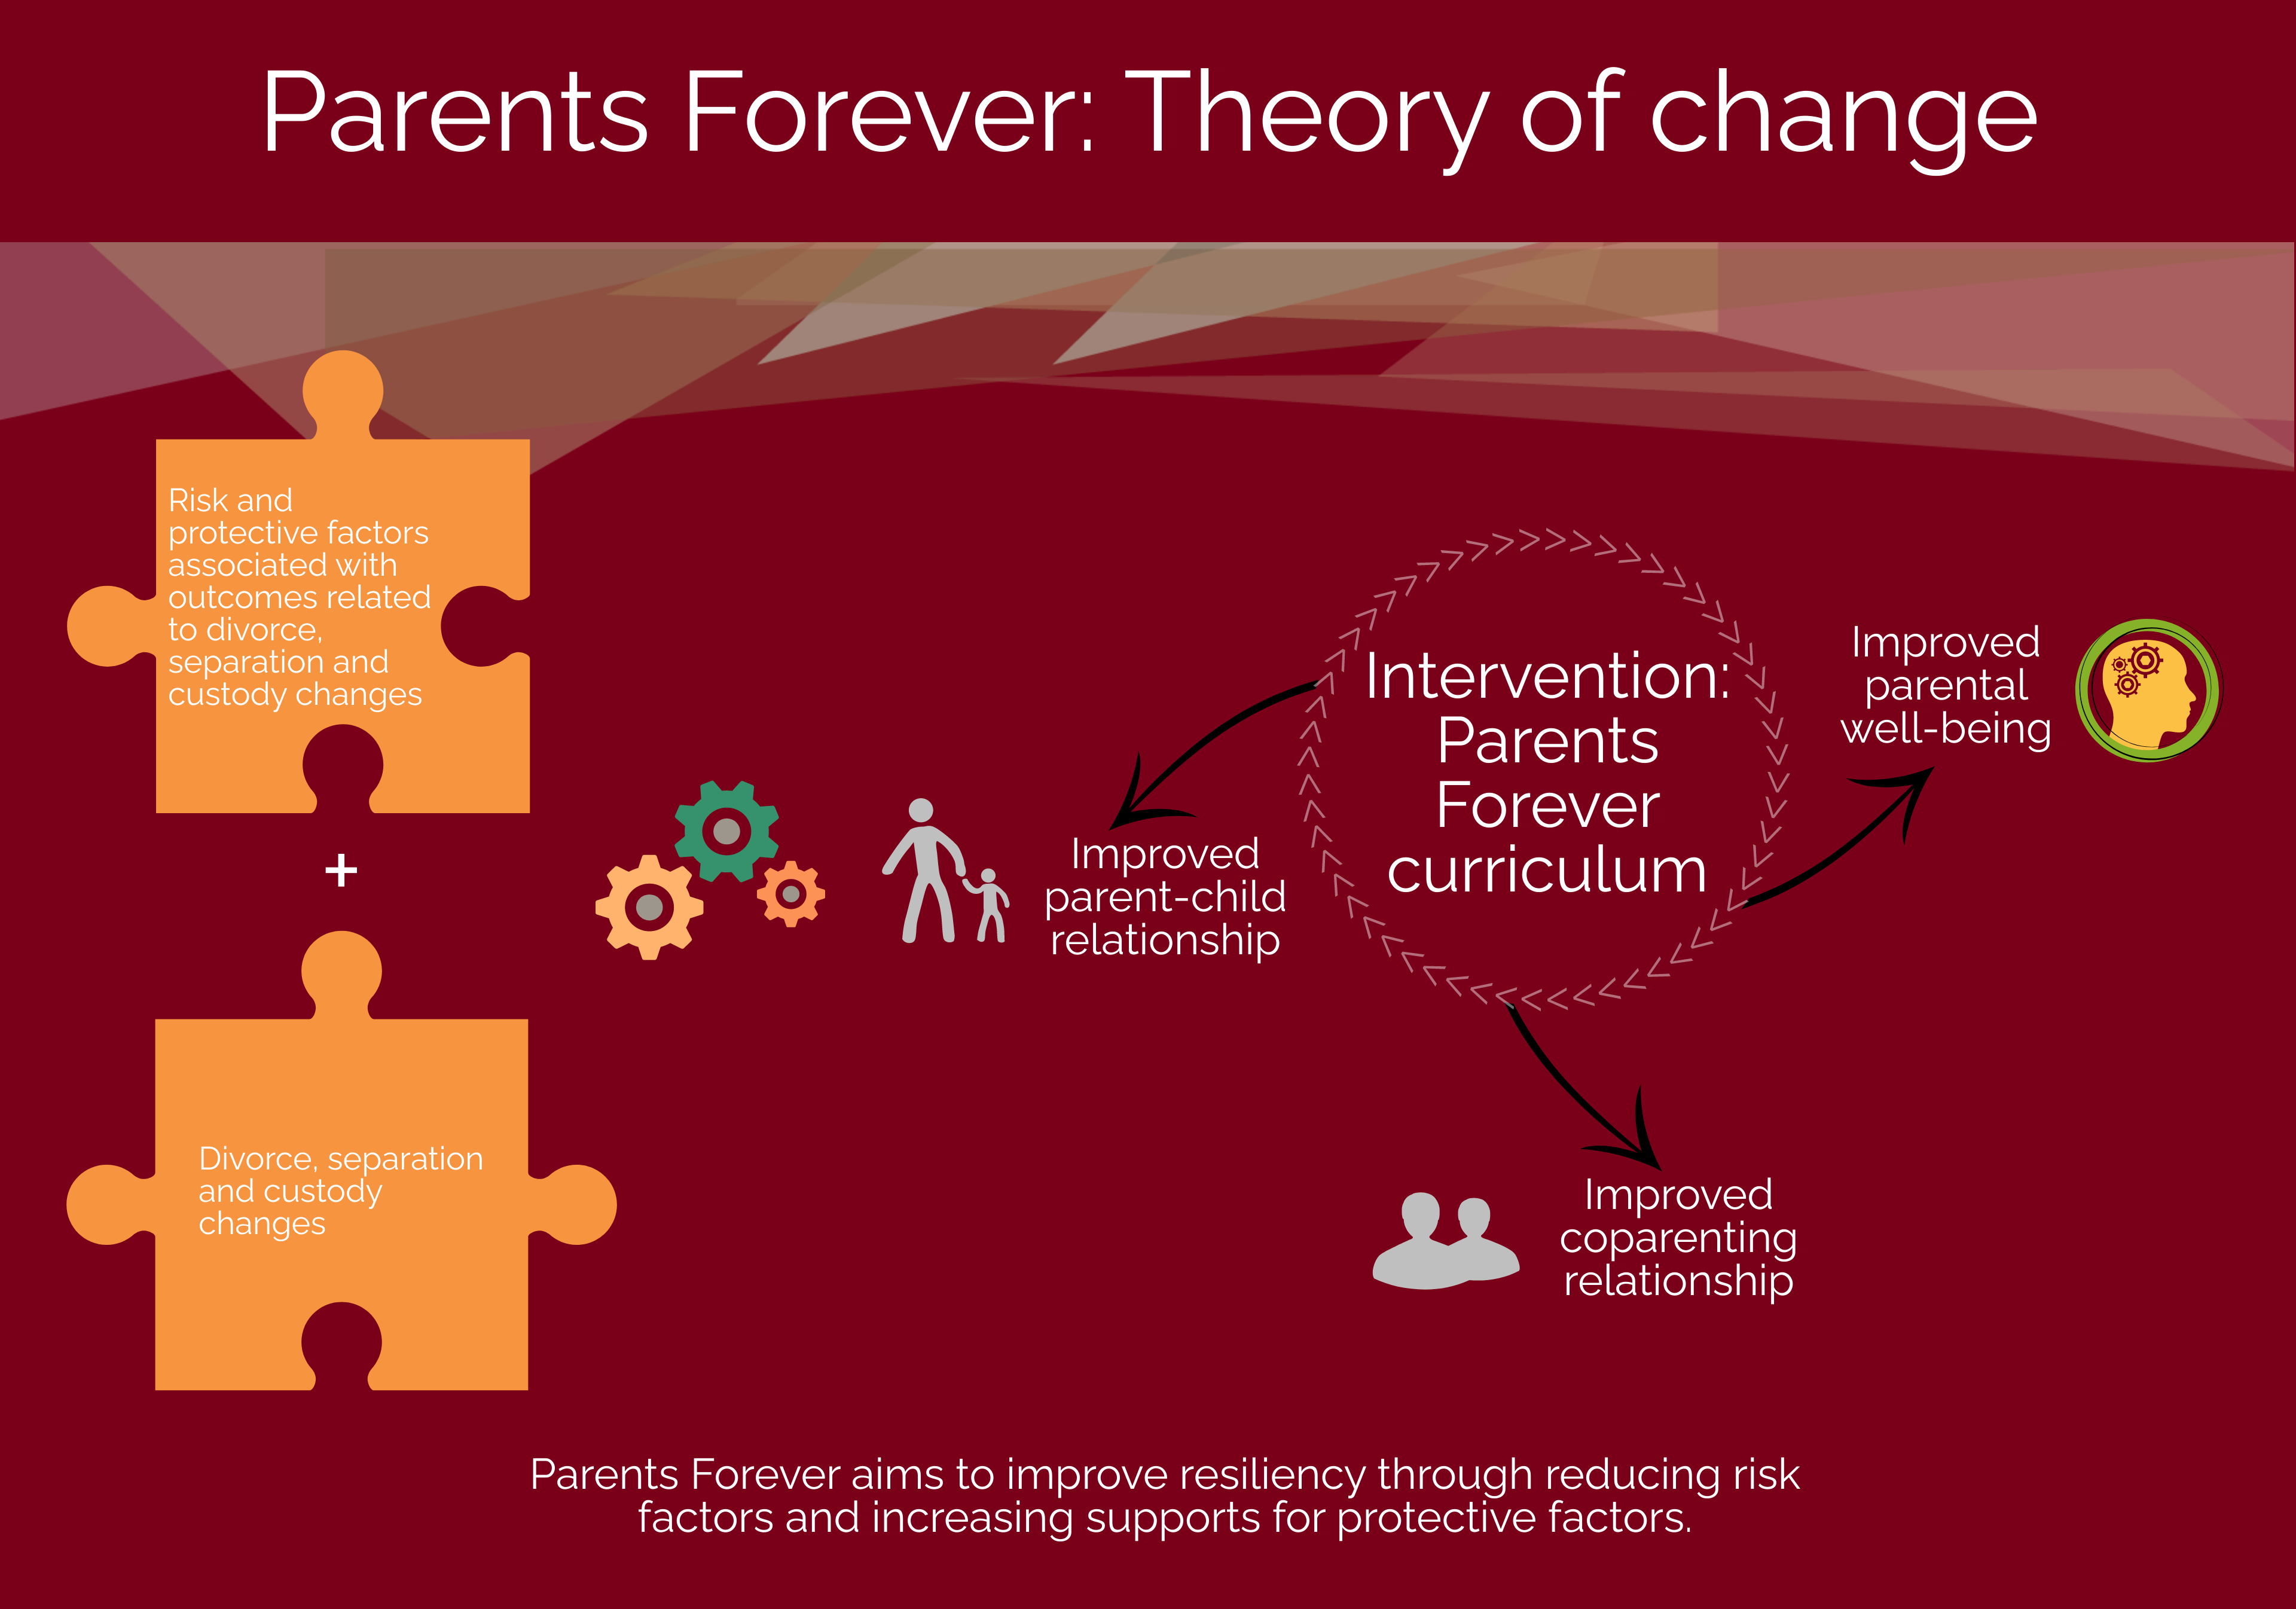 Parents Forever Theory of Change infographic